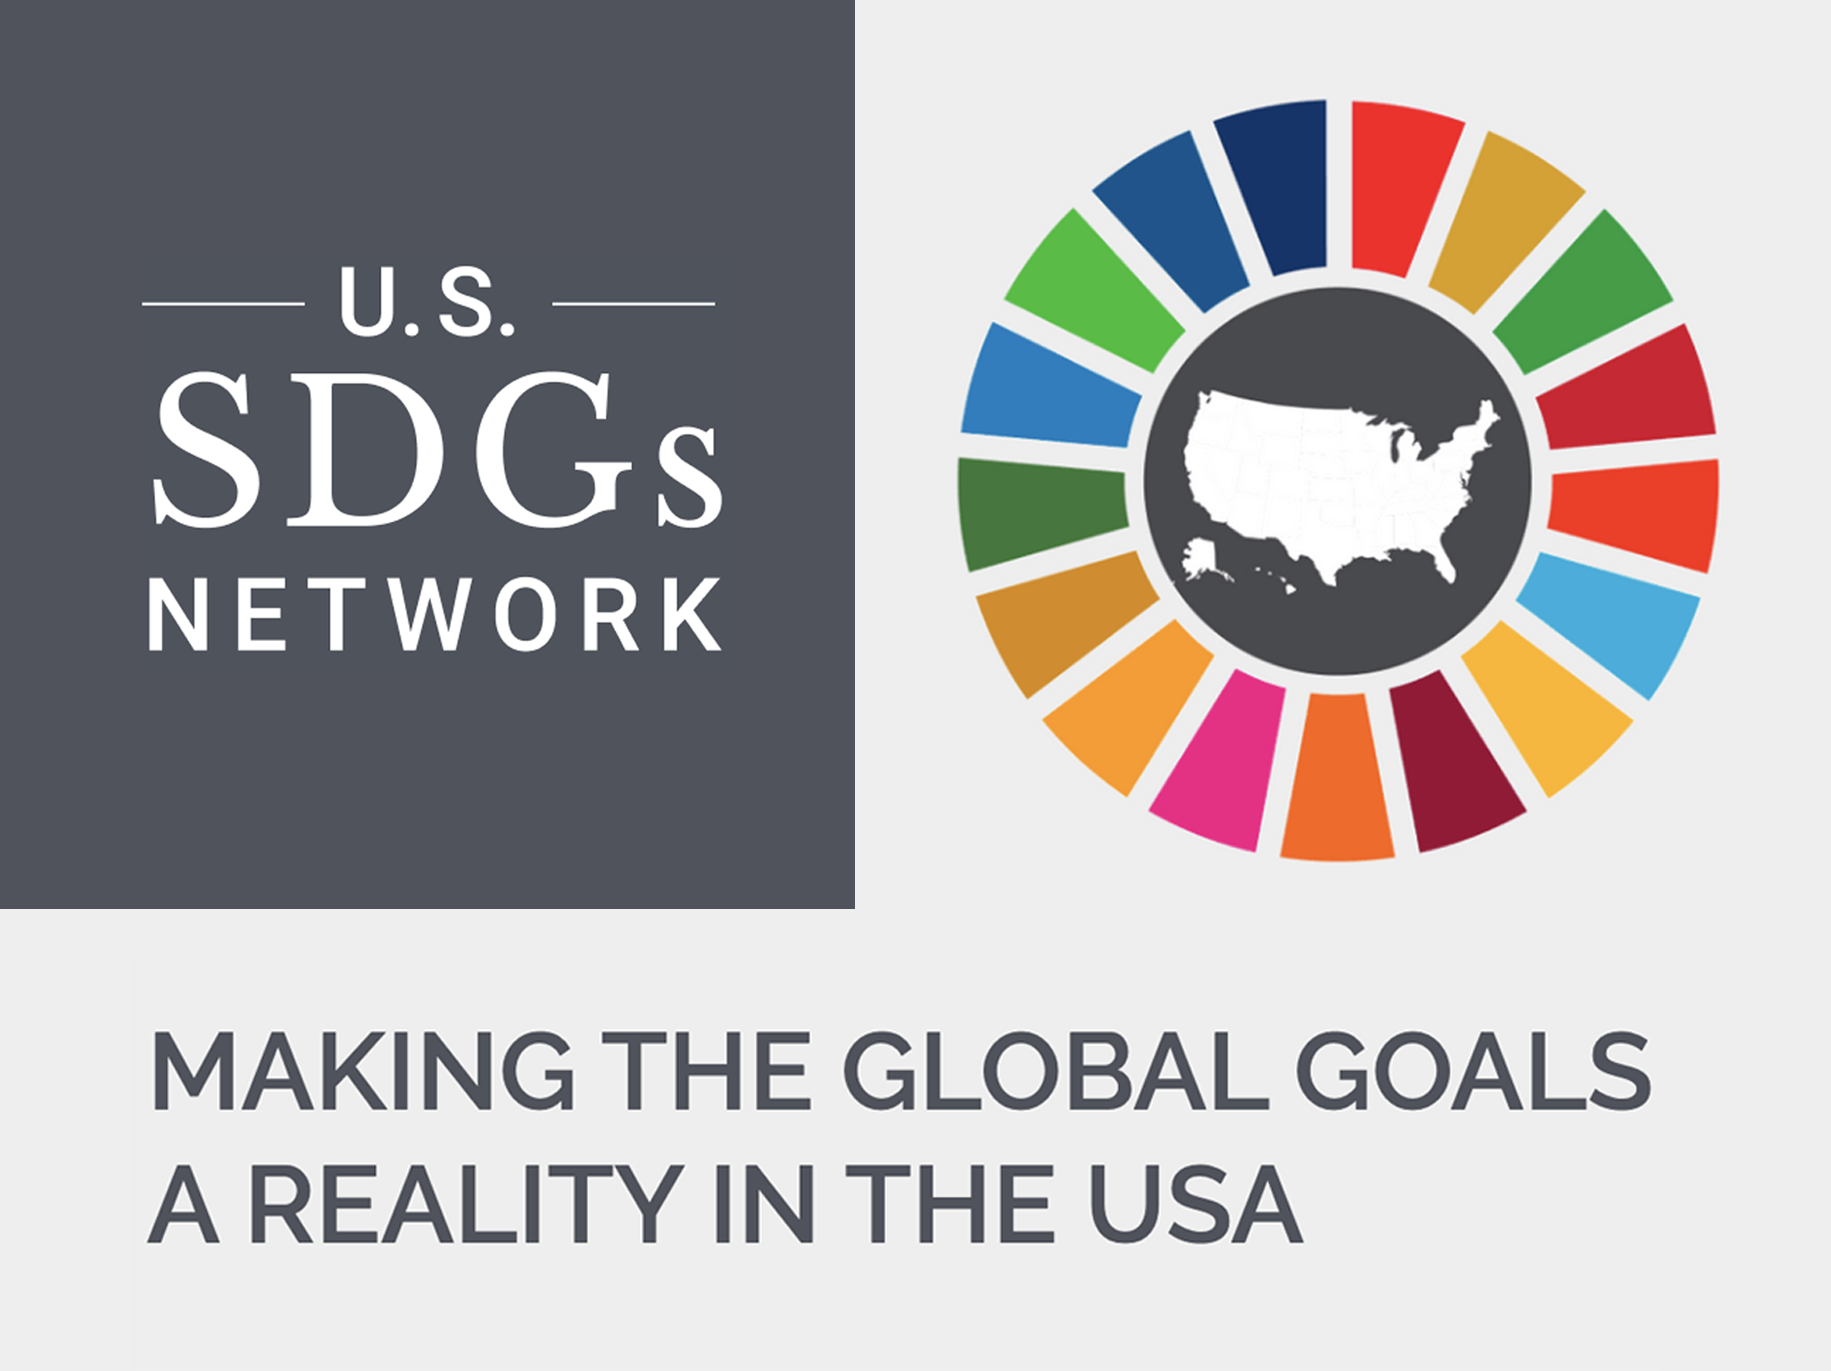 Furthering UN Sustainable Development Goals Within The USA